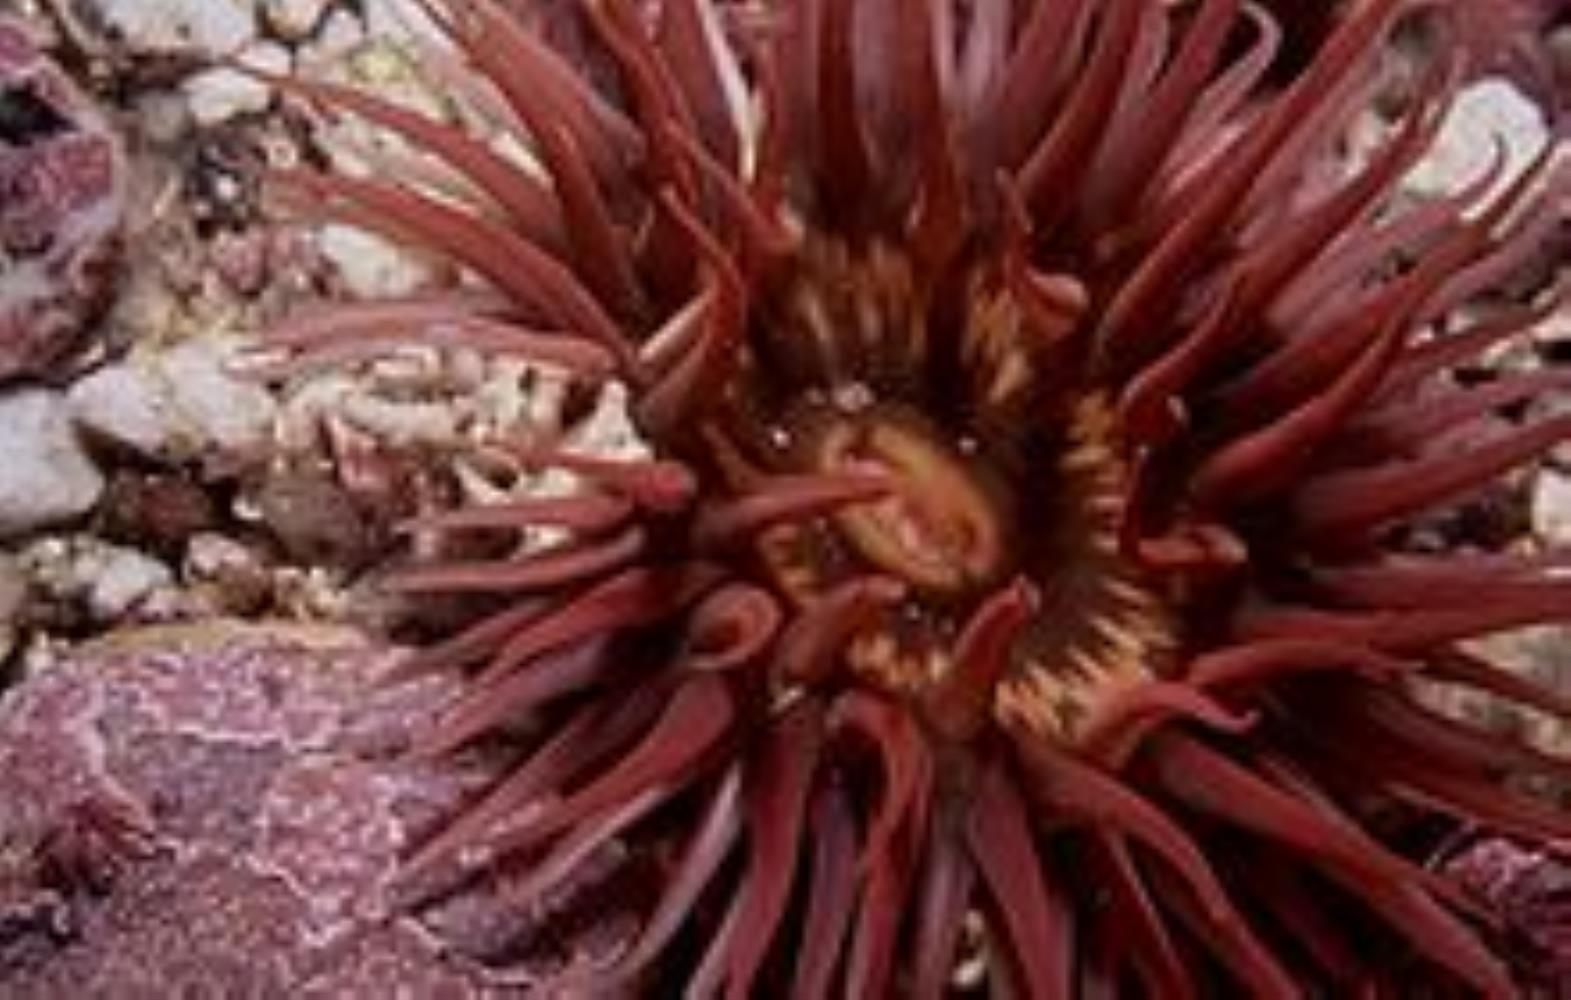 Long-tentacled/Crevice Anemone